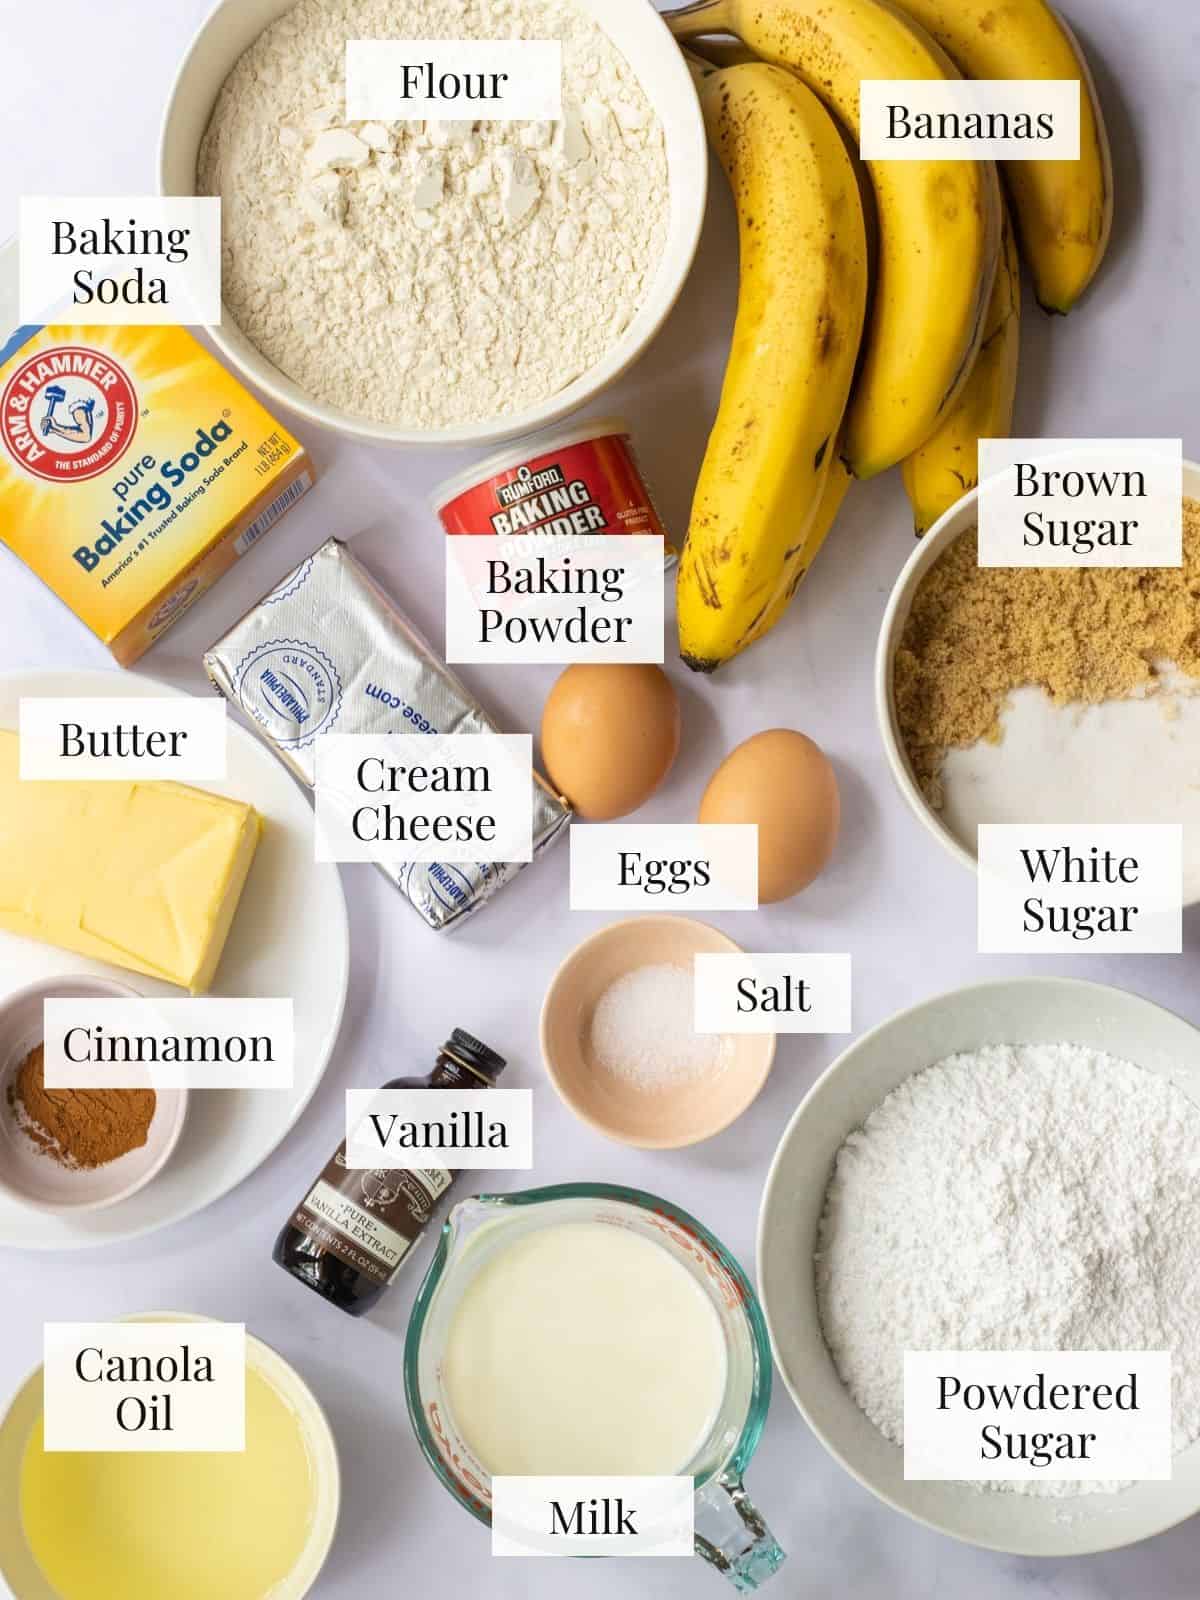 Ingredients for banana cake and cream cheese frosting with labels.